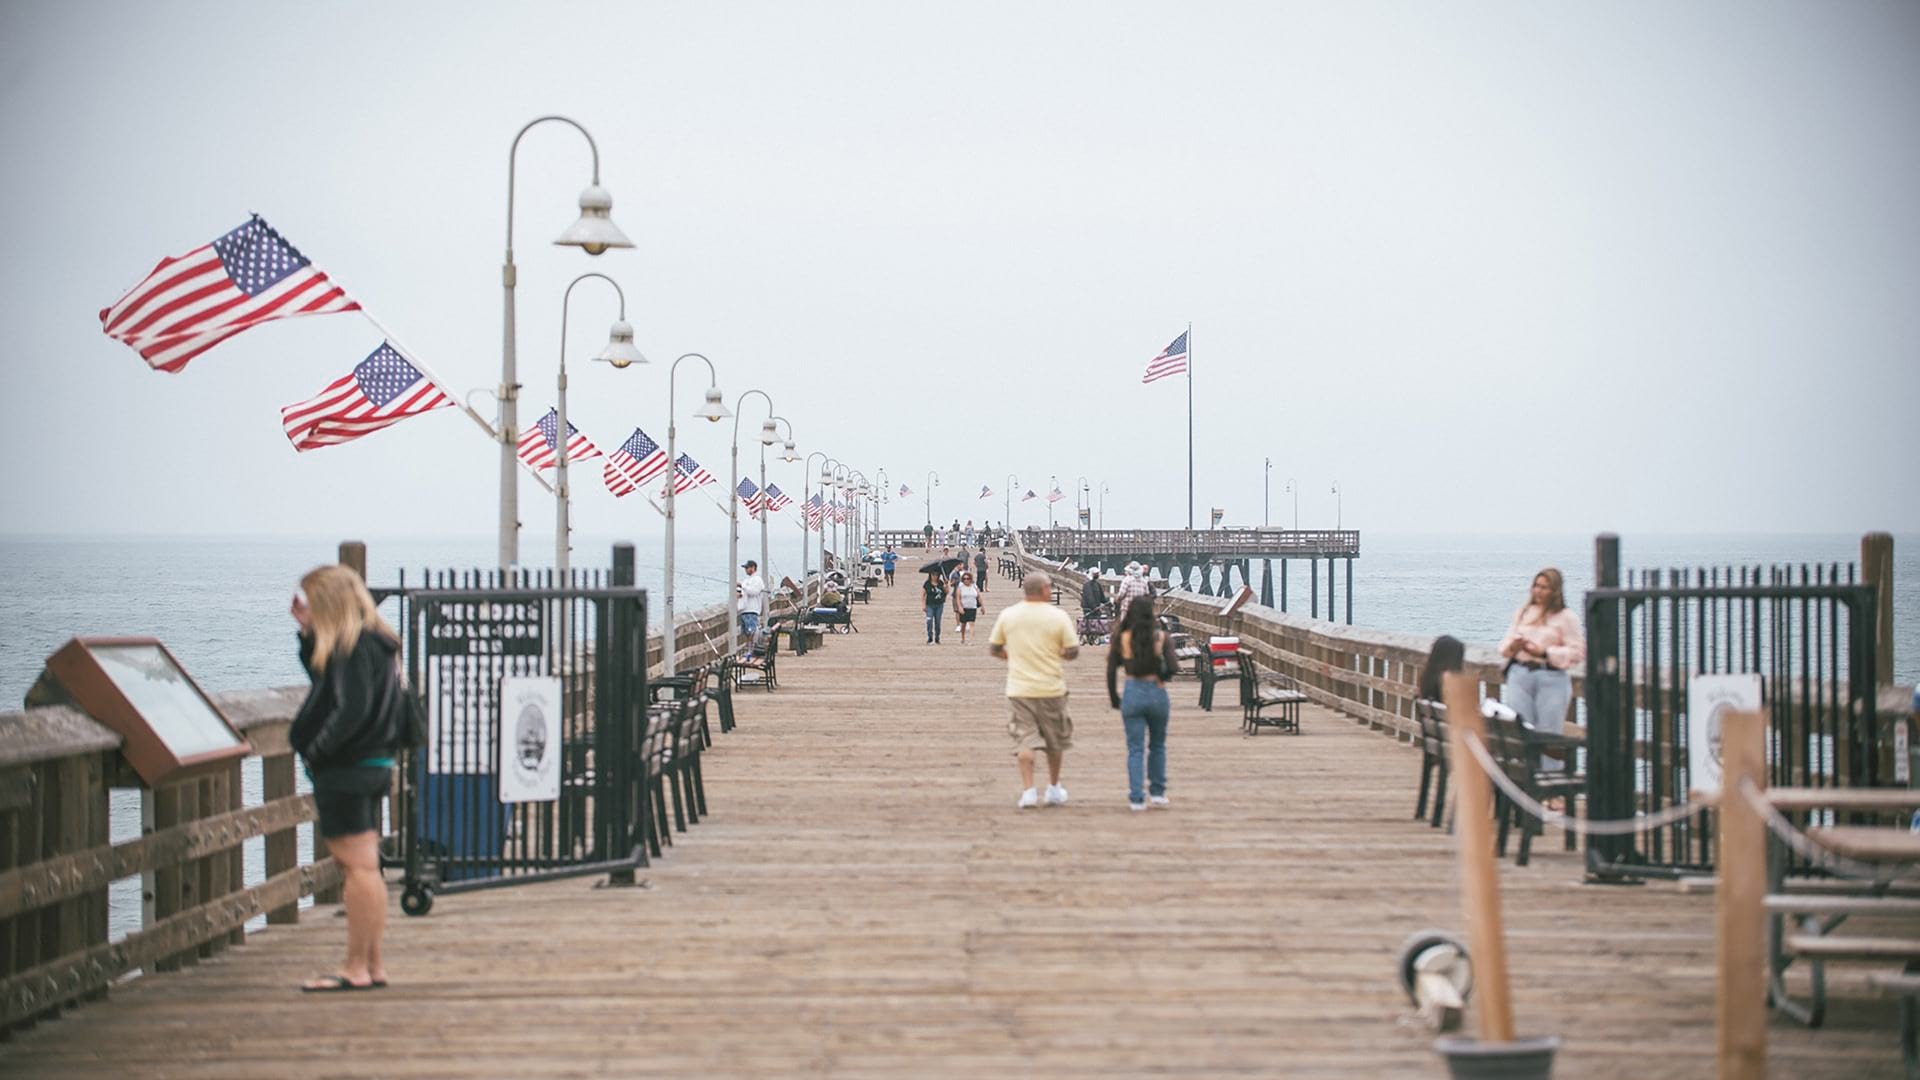 People walking on a pier in the daytime